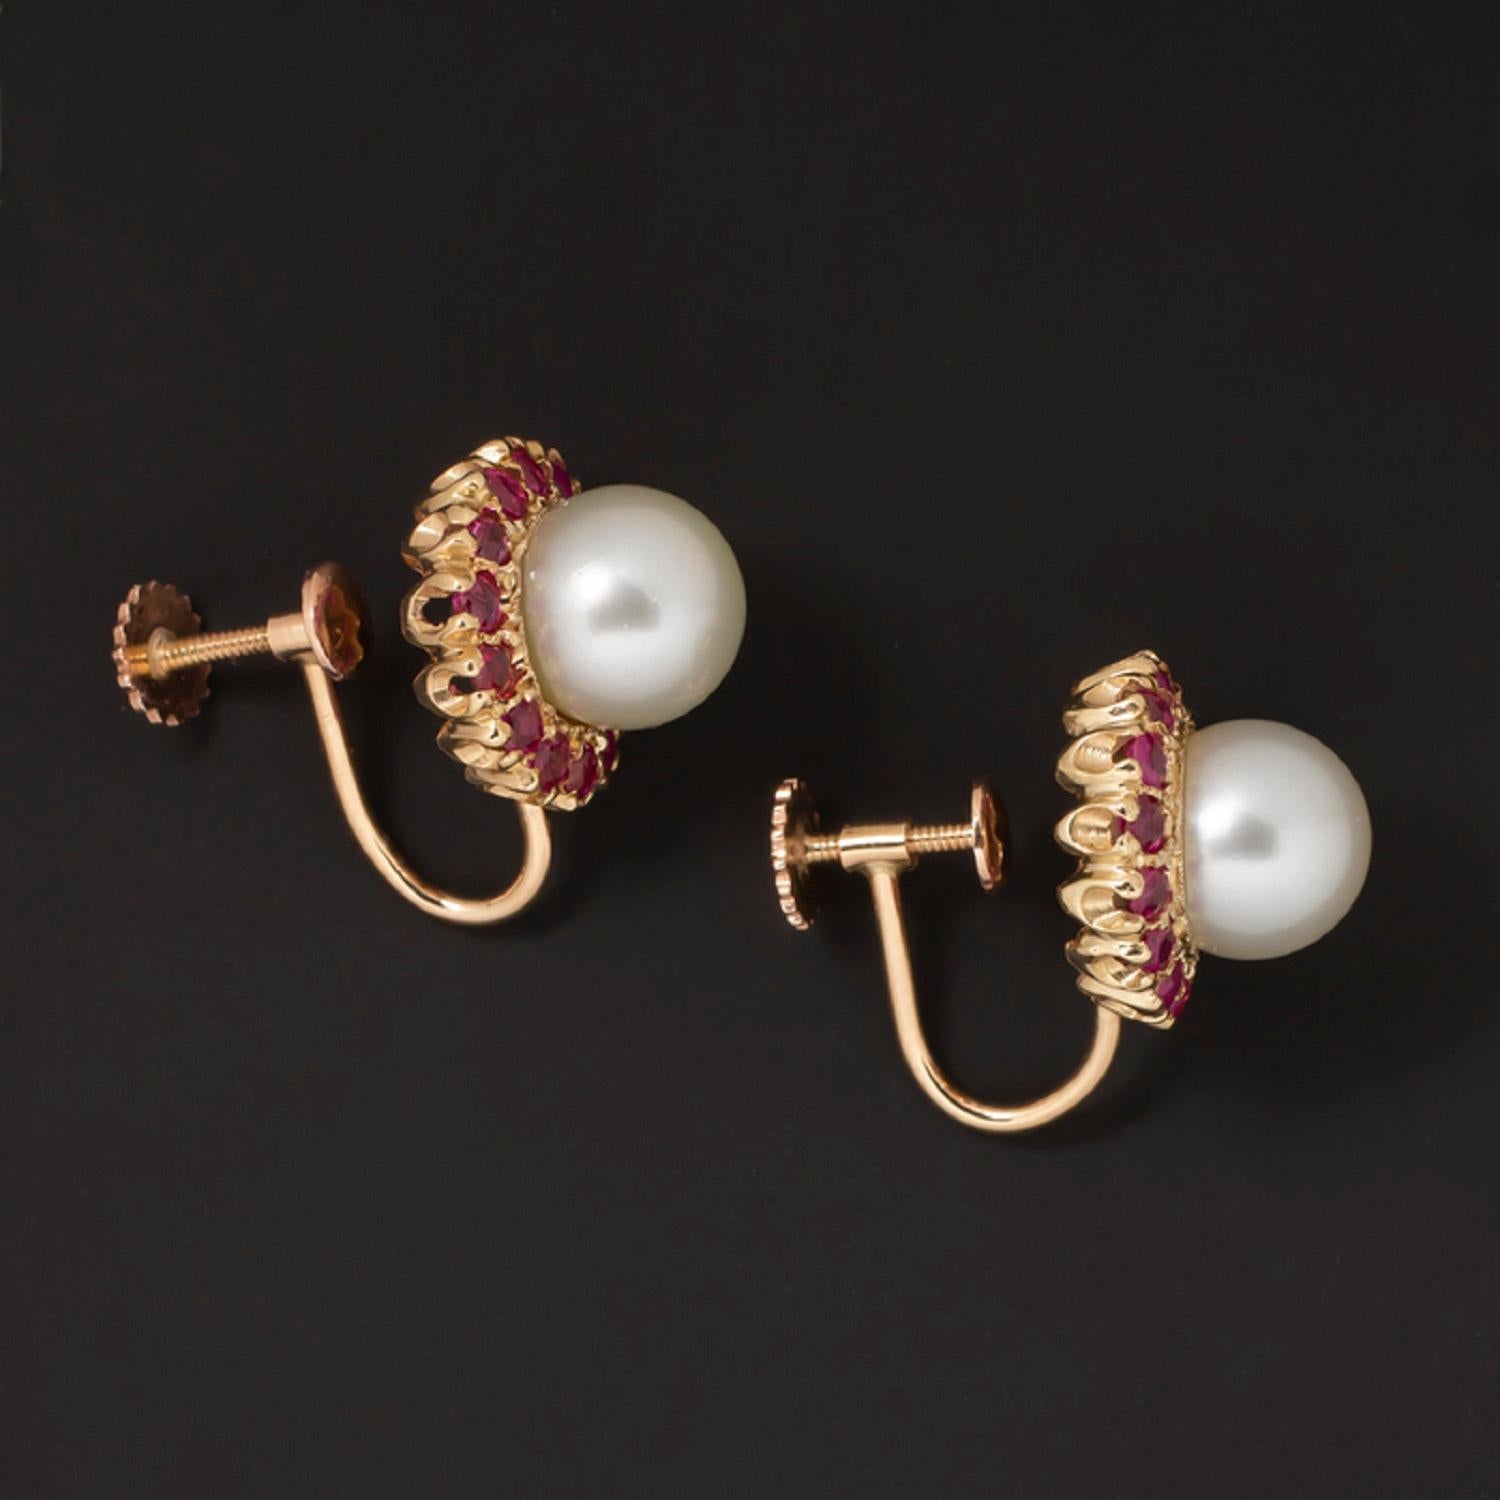 Gorgeous vintage pearl and ruby earrings have a classically glamorous design with rich color and contrast! The earrings feature two large pearls surrounded by halos of rich red natural rubies! The rubies have gorgeous luster and a bright red color